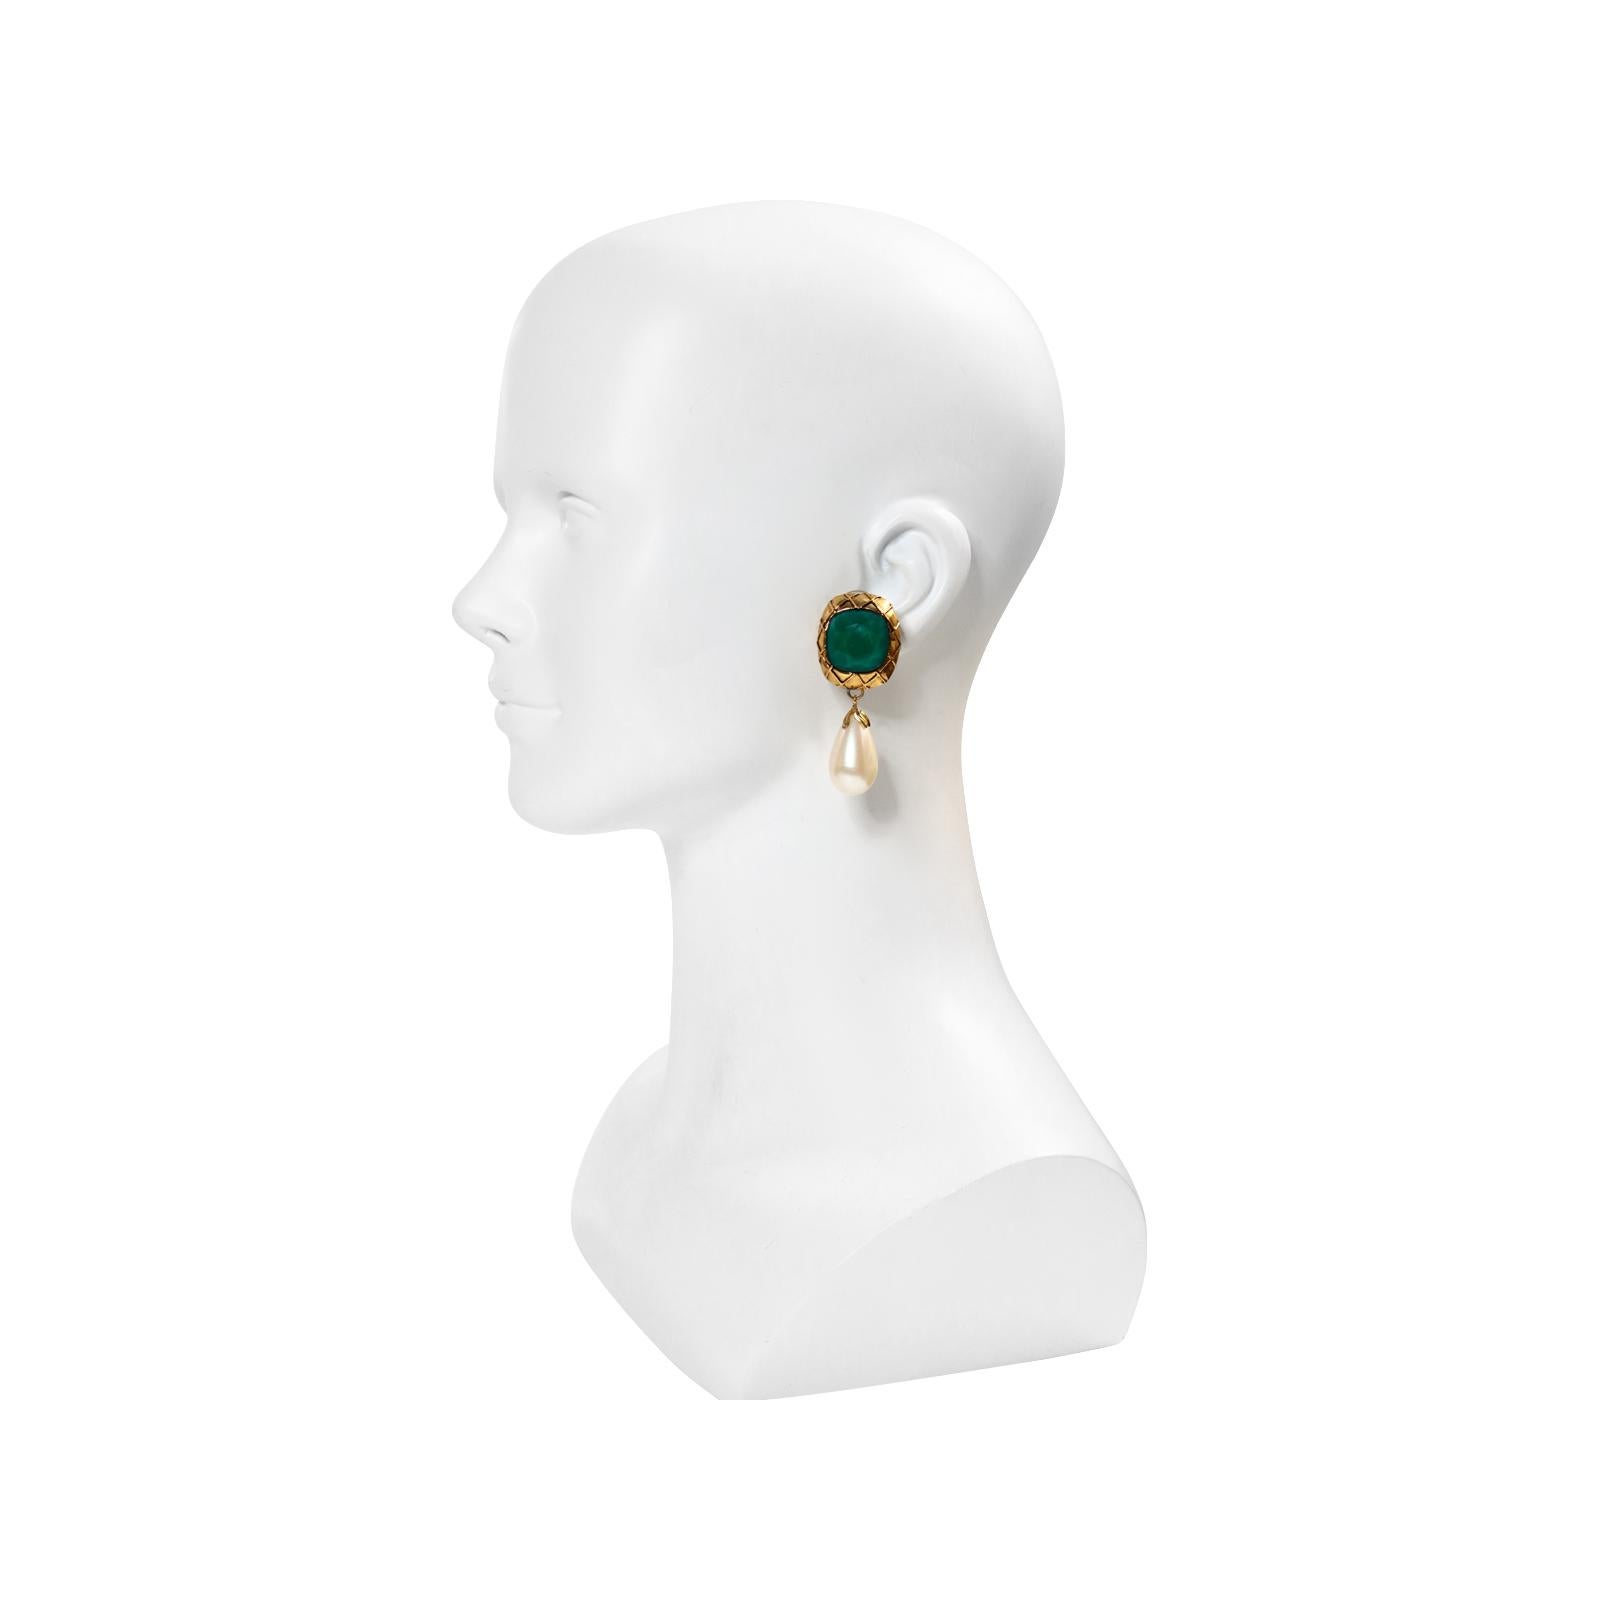 Vintage French Gold with Green and Dangling Faux Peal Earrings Circa 1980s.  These earrings are completely in the style of Chanel and so well made. The Green faceted stone is surrounded by a quilted darker gold tone like the house of Chanel.  The